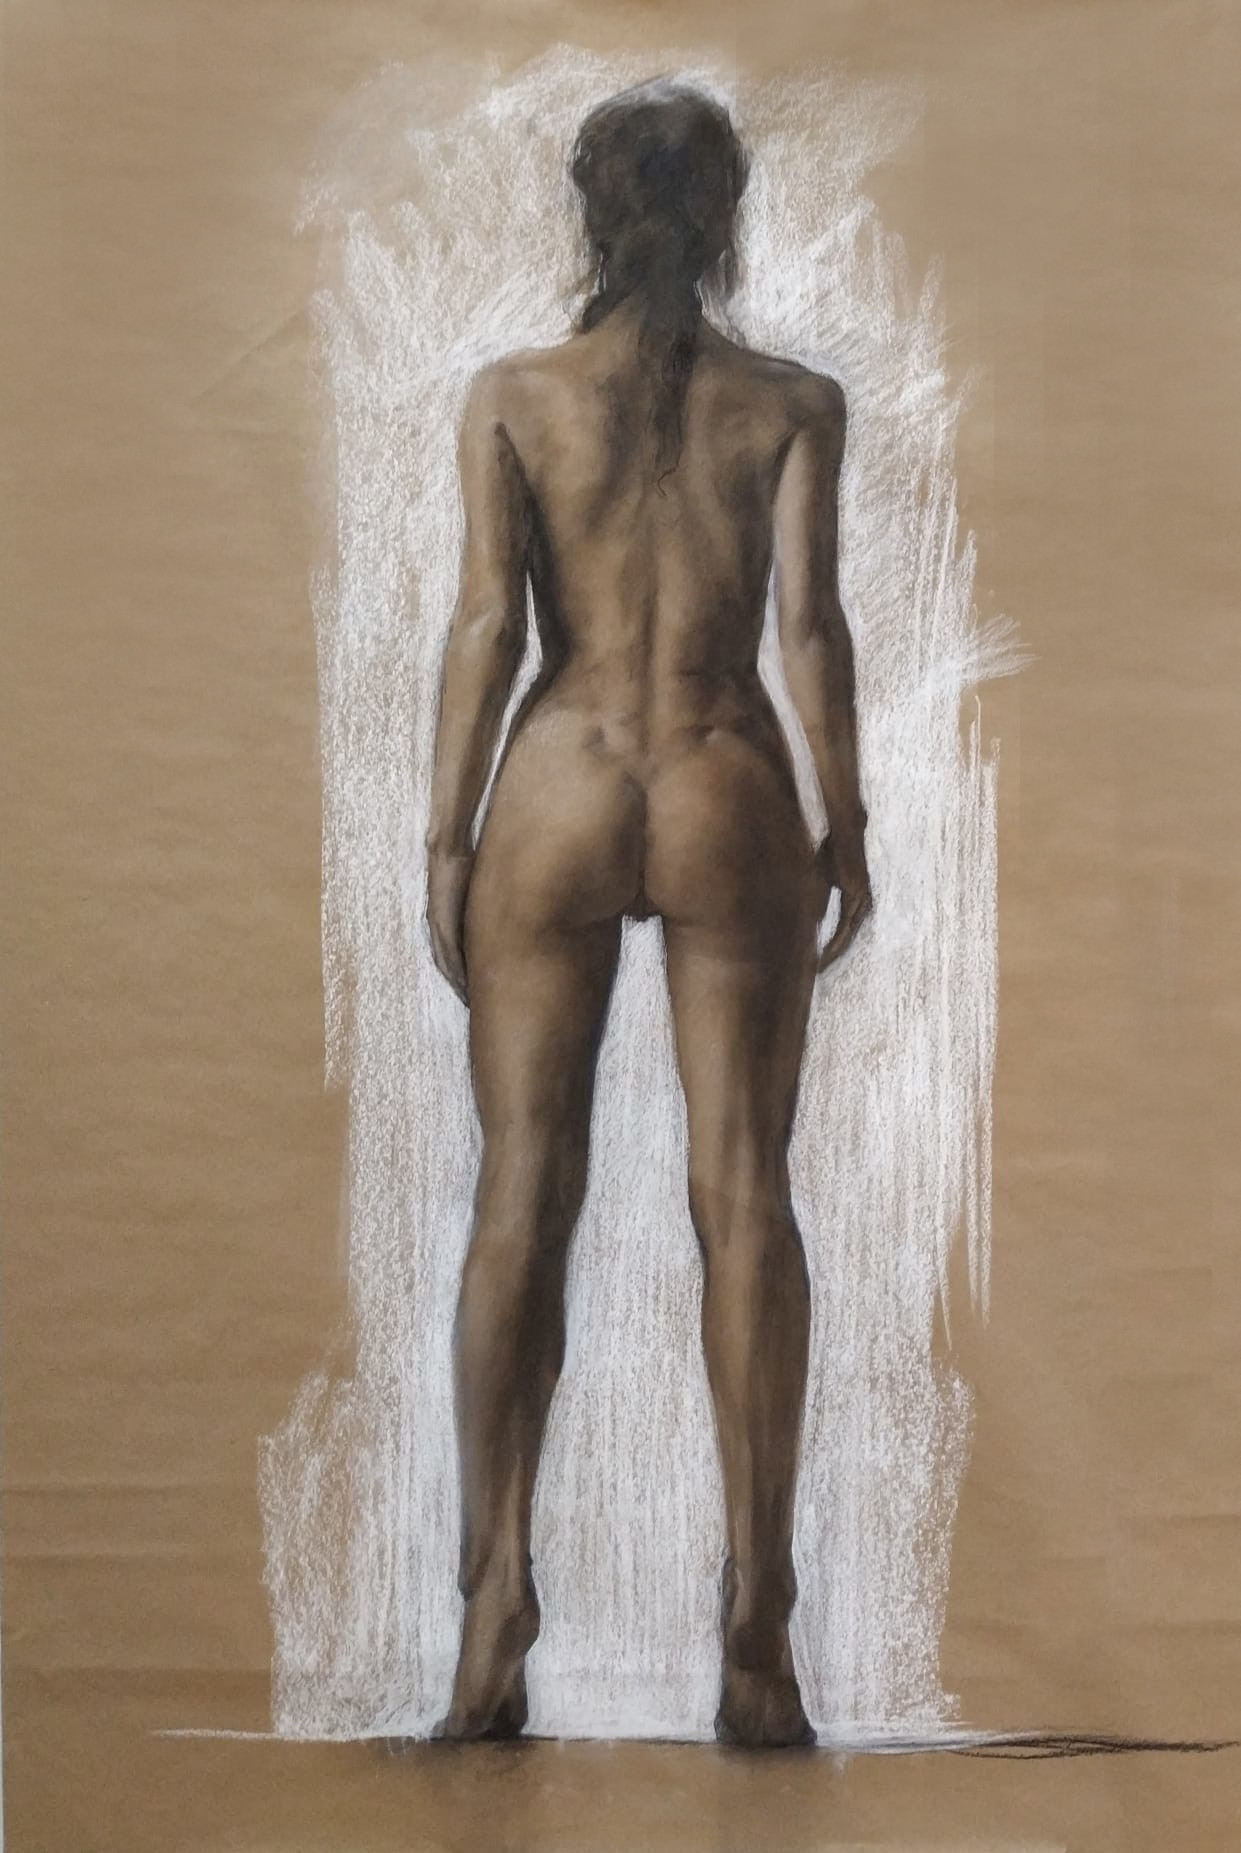 Back view (chalk and charcoal, 90x130)